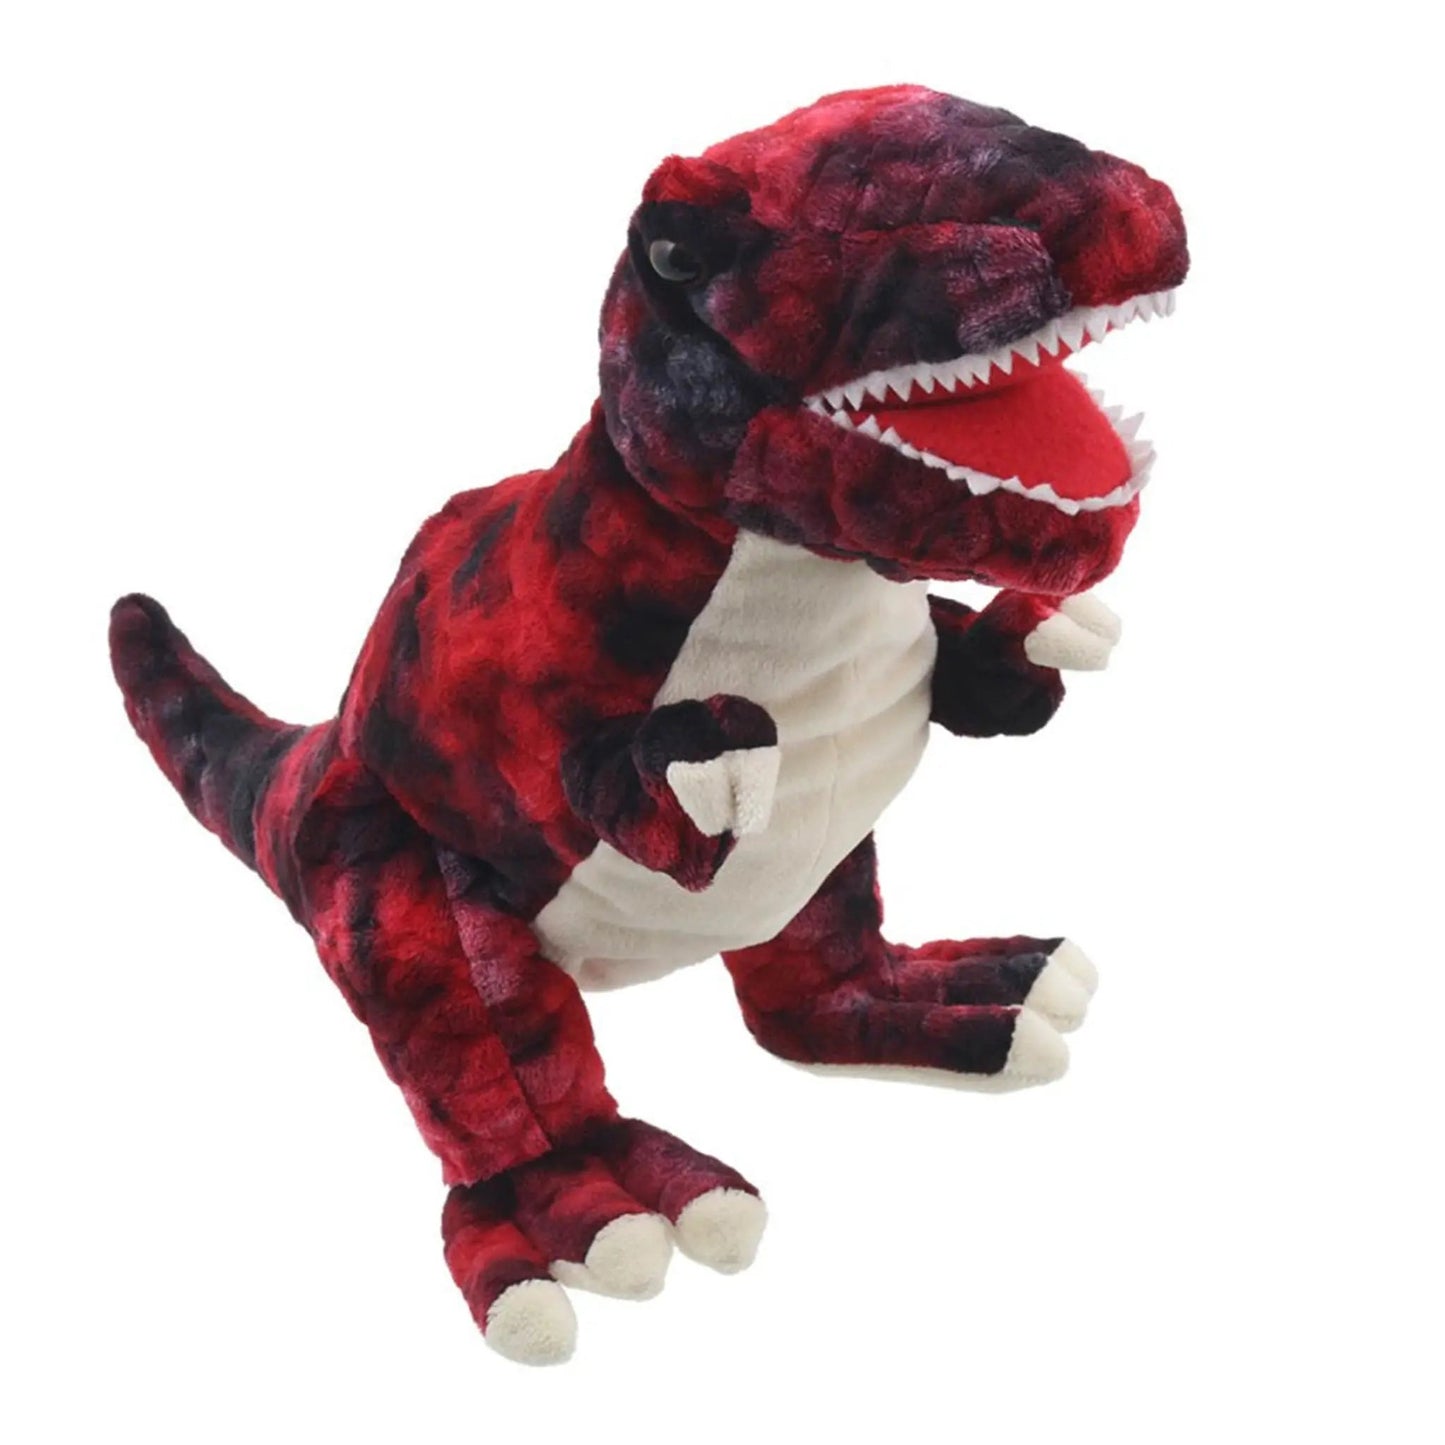 Baby Dino - T-Rex (Red) - The Puppet Company - The Forgotten Toy Shop